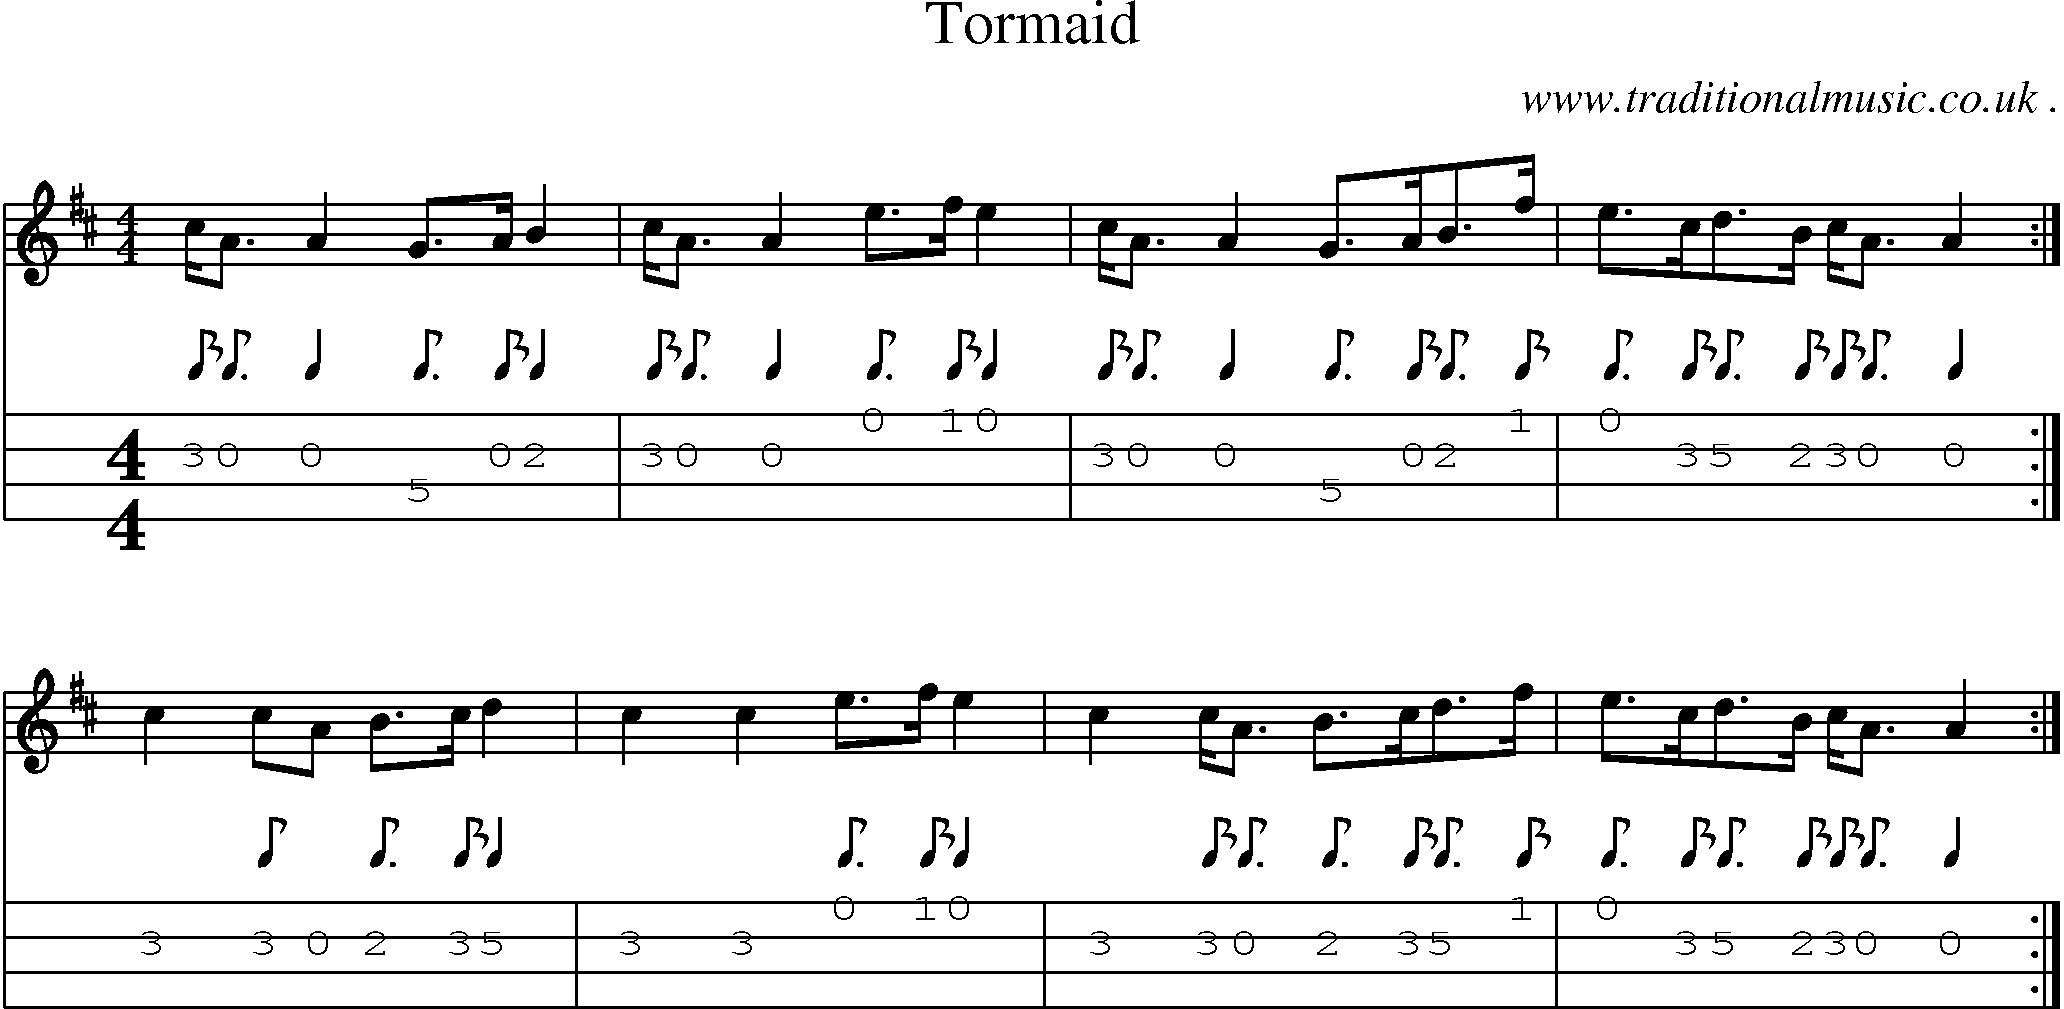 Sheet-music  score, Chords and Mandolin Tabs for Tormaid